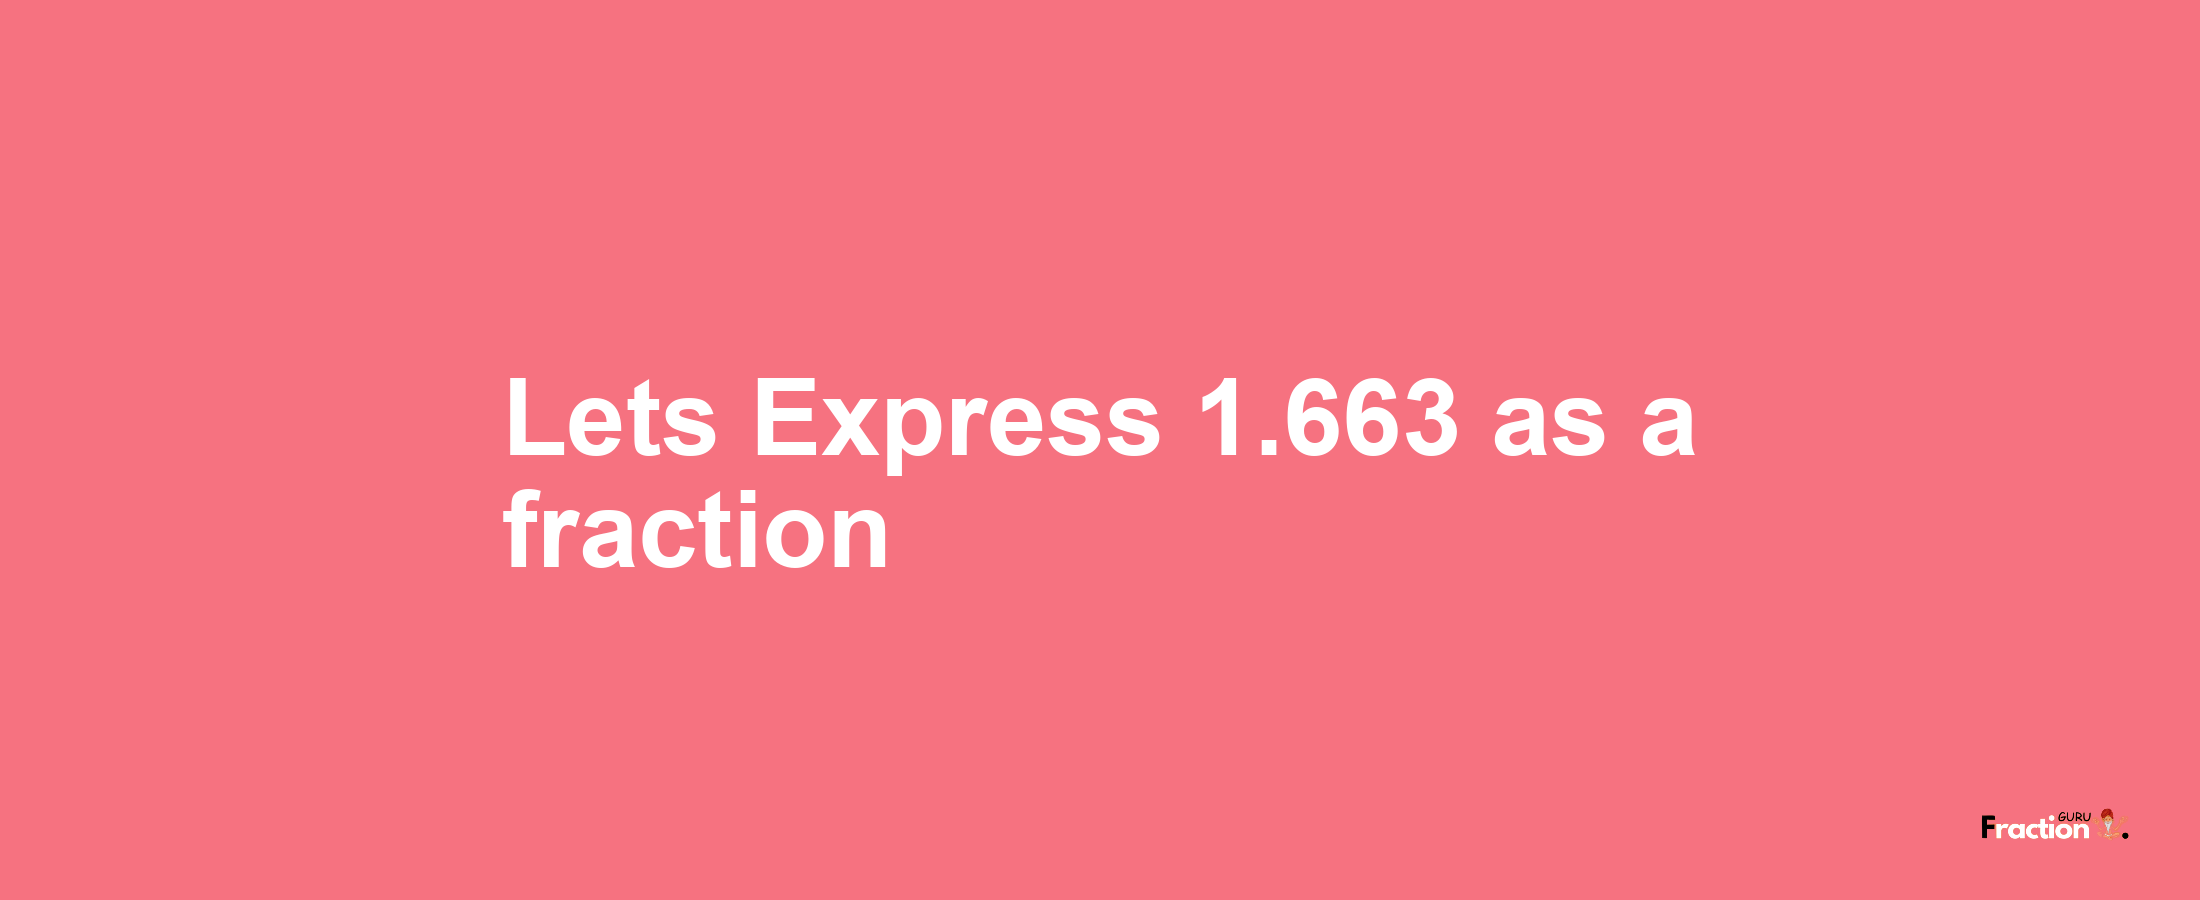 Lets Express 1.663 as afraction